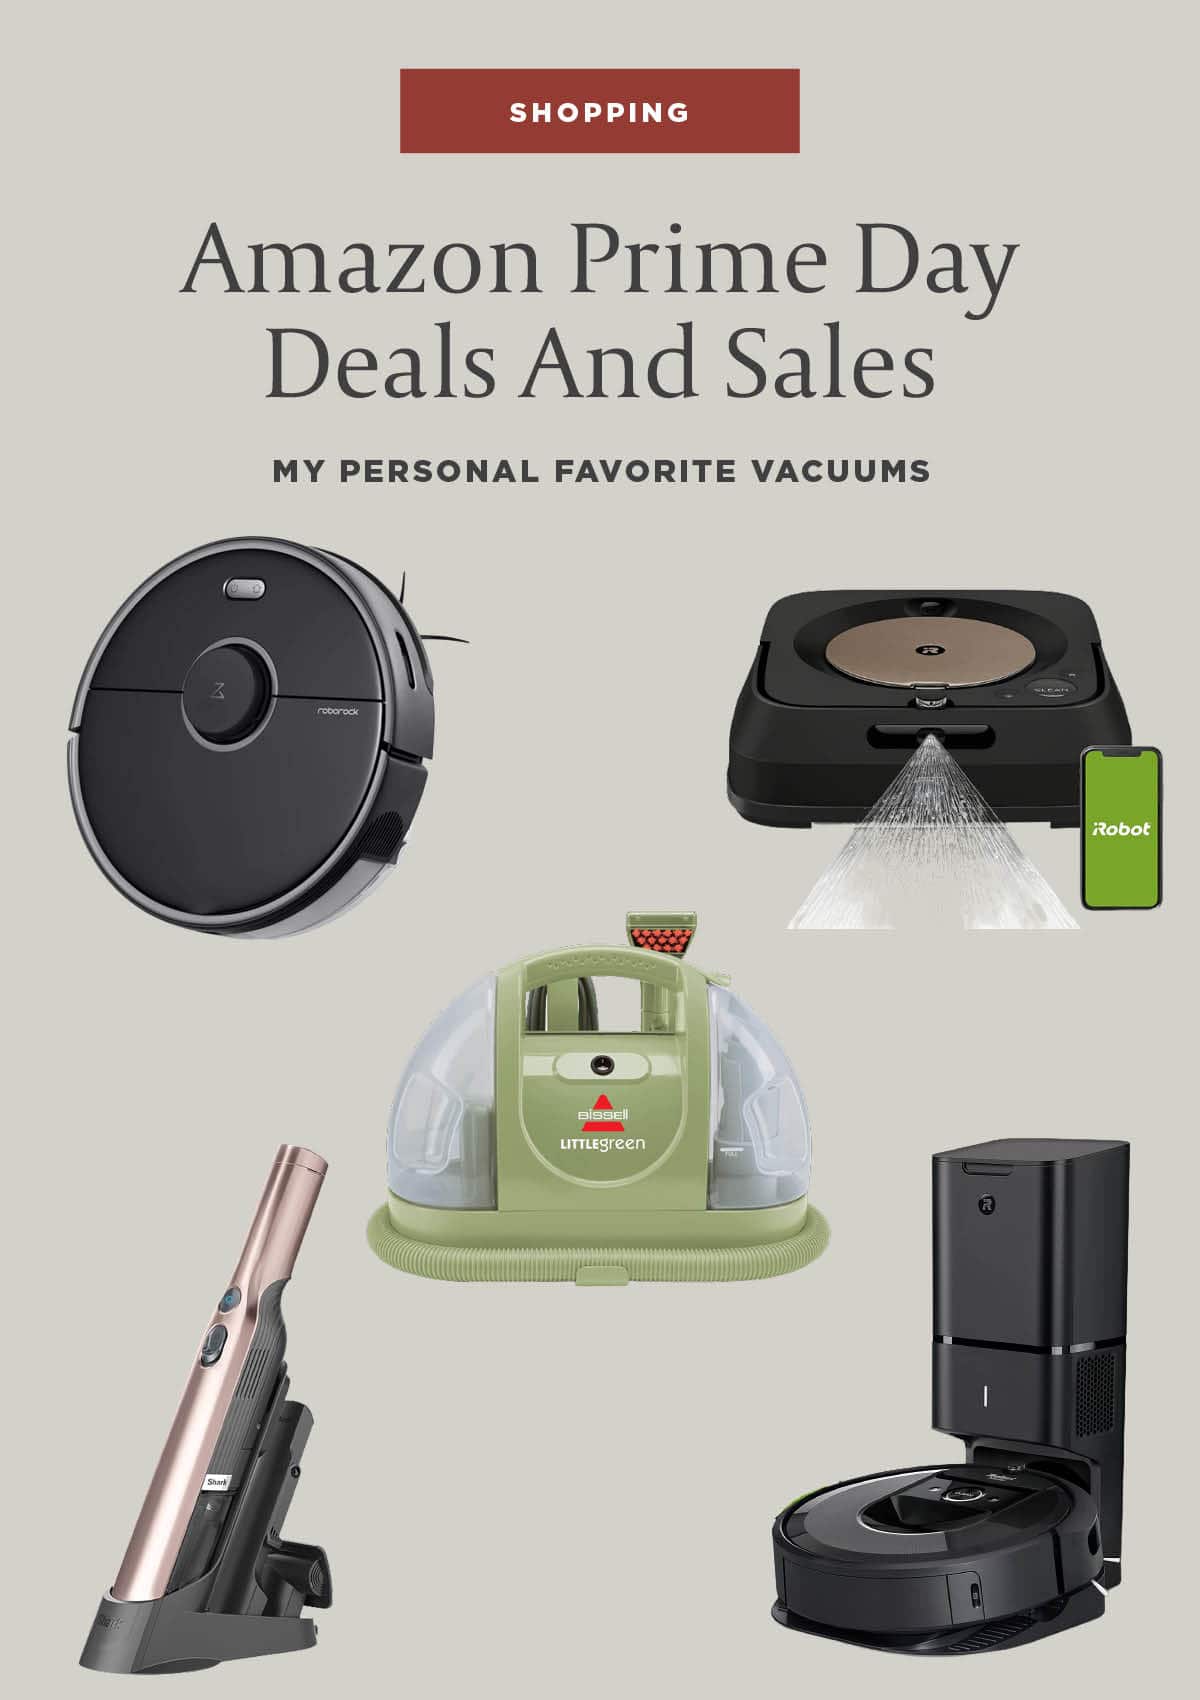 Make Cleaning A Breeze With These Robotic Vacuum Deals During The Amazon Prime Day Sale - Sharing the Best Amazon Prime Day Deals on smart robotic vacuums for your home